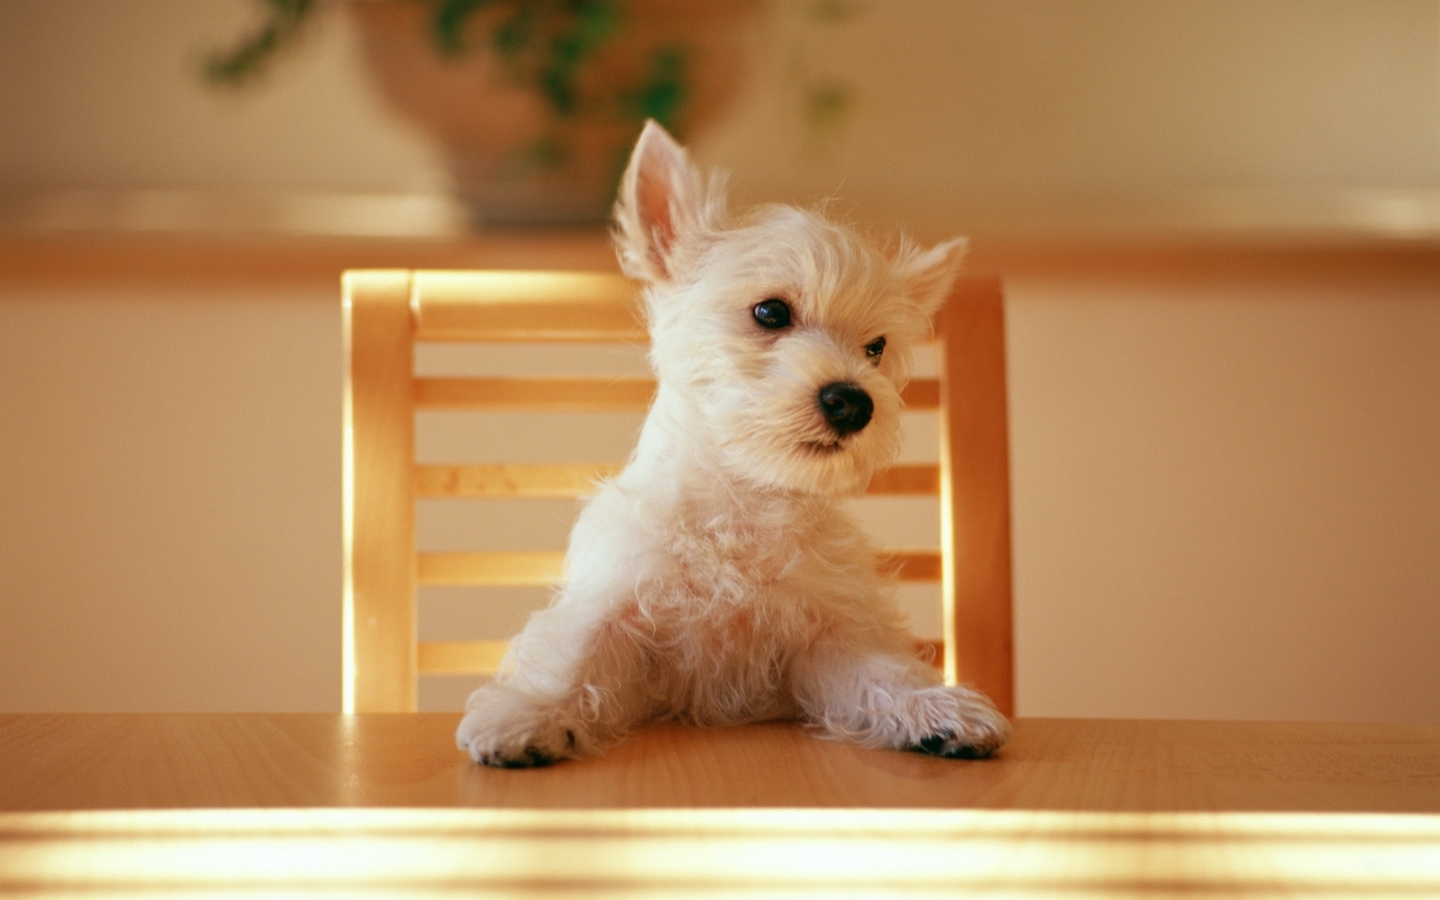 Dog at the table for 1440 x 900 widescreen resolution